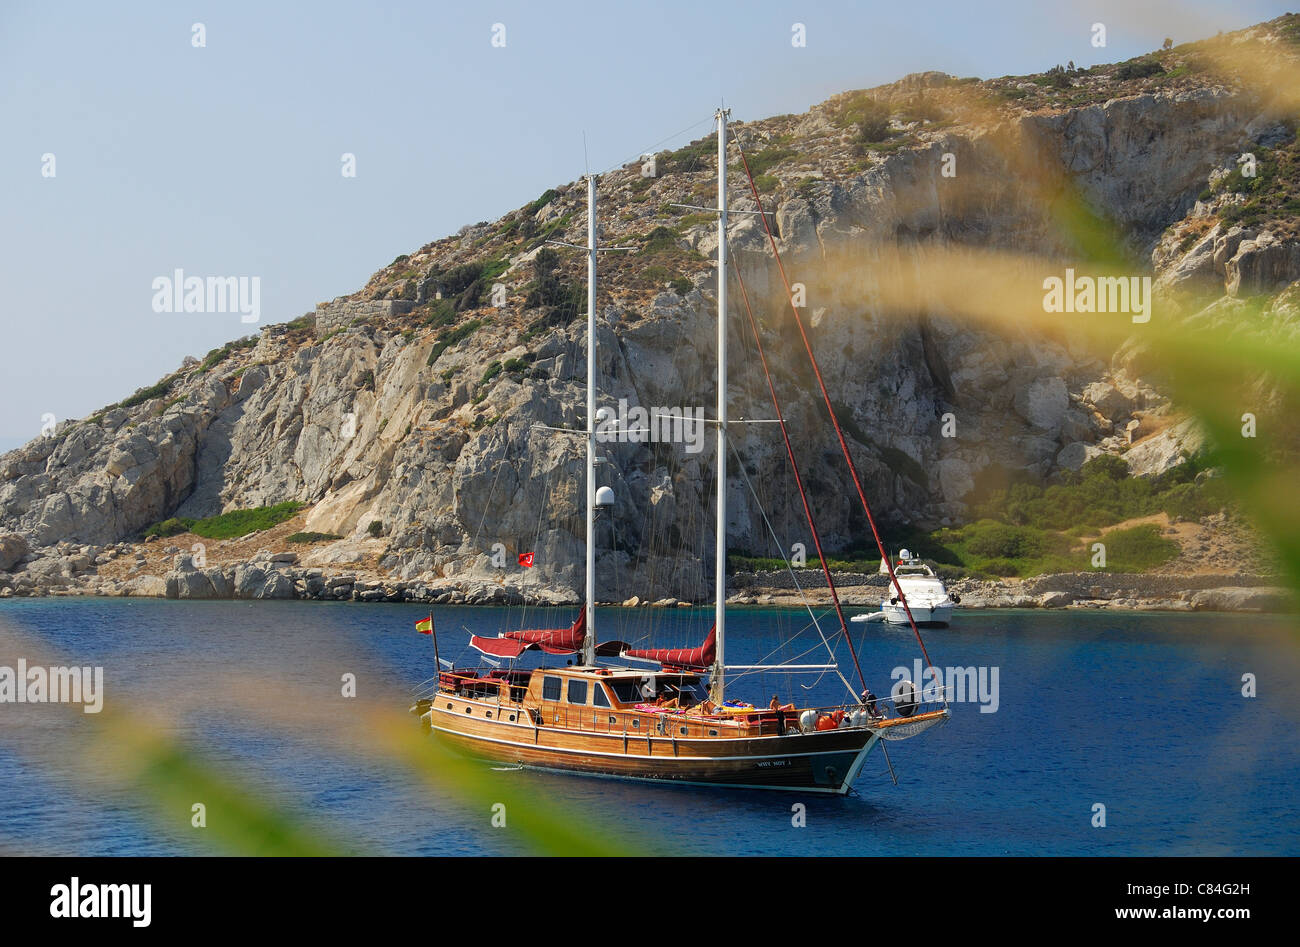 KNIDOS, DATCA PENINSULA, TURKEY. A traditional Turkish gulet moored in the harbour at ancient Knidos. 2011. Stock Photo